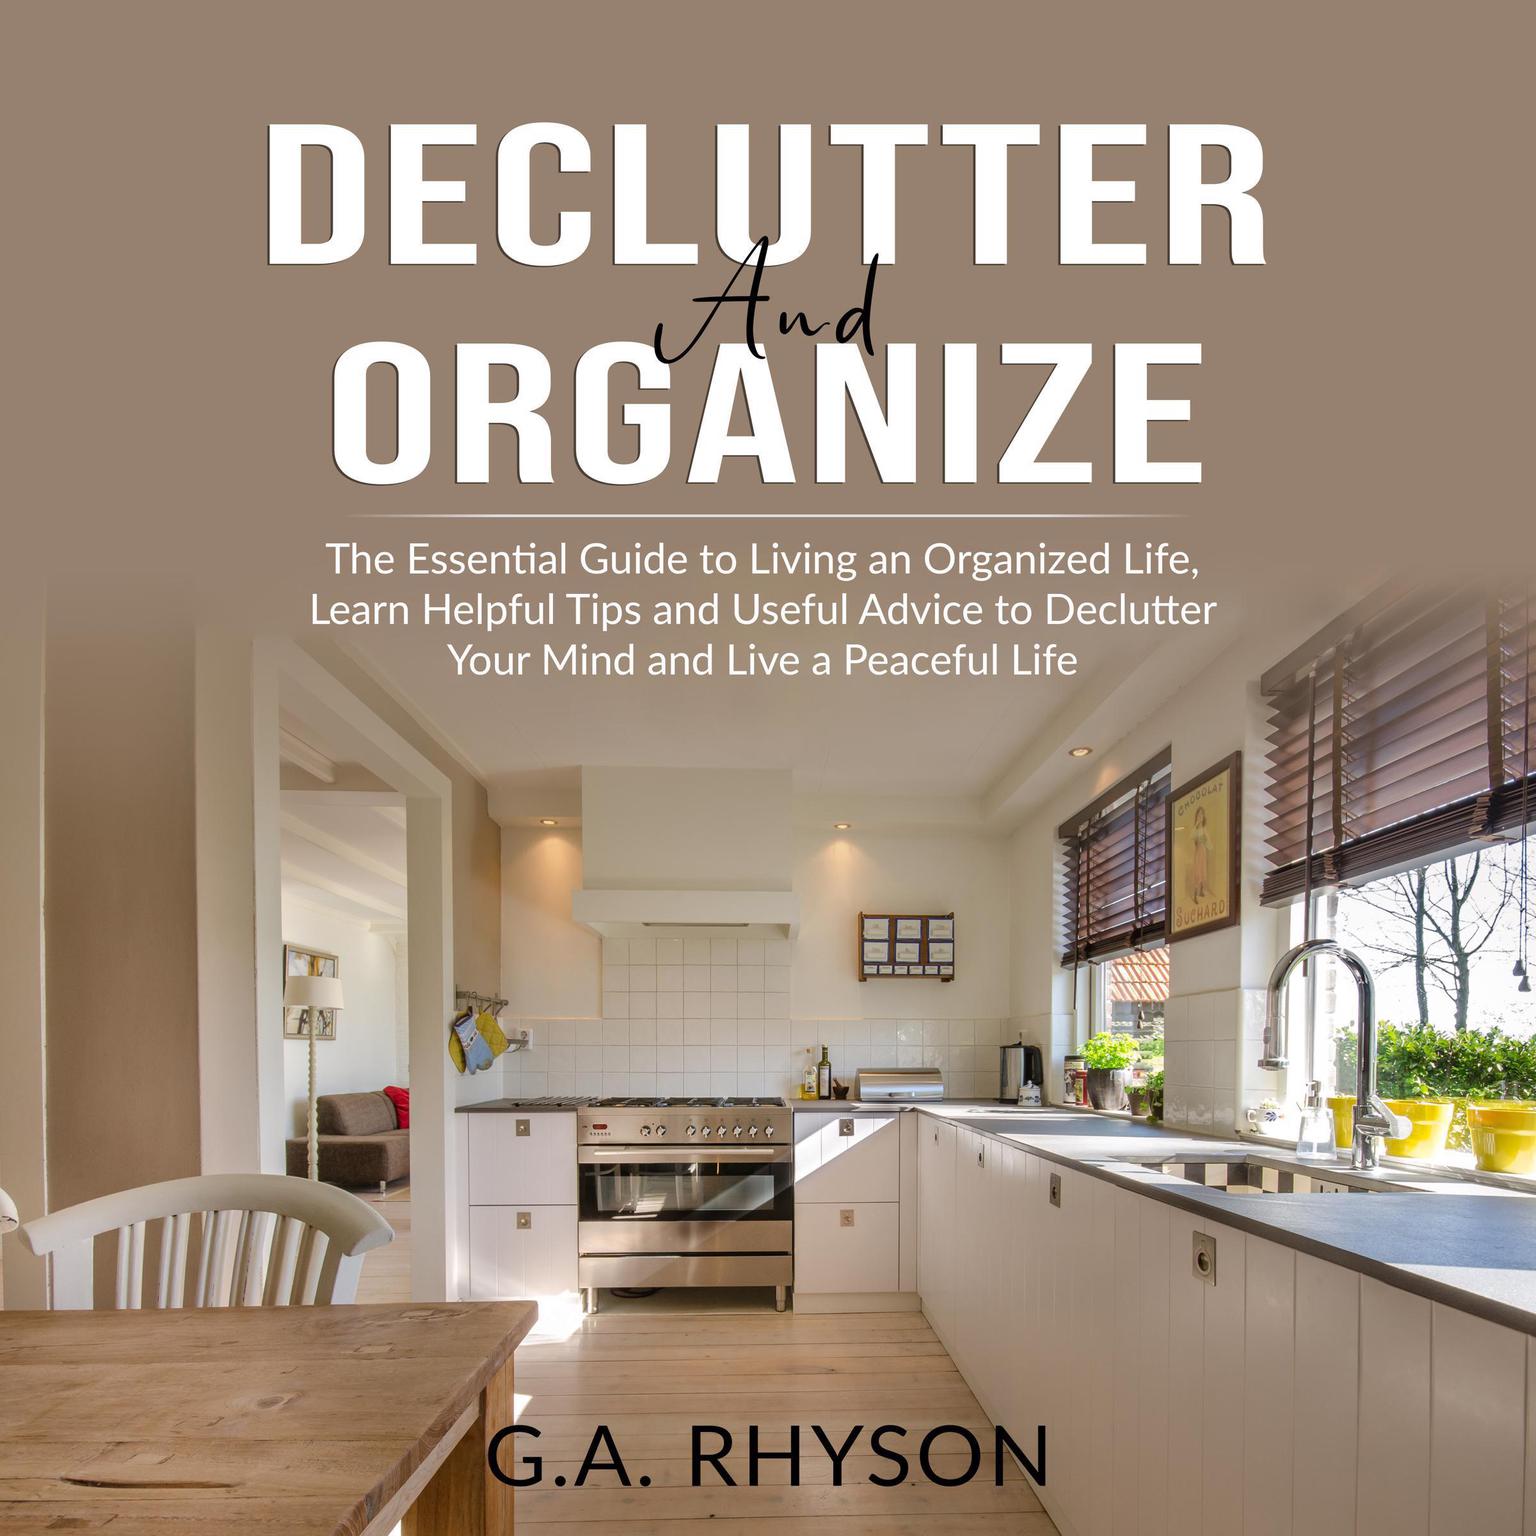 Declutter and Organize: The Essential Guide to Living an Organized Live, Learn Helpful Tips and Useful Advice to Declutter Your Mind and Live a Peaceful Life Audiobook, by G.A. Rhyson